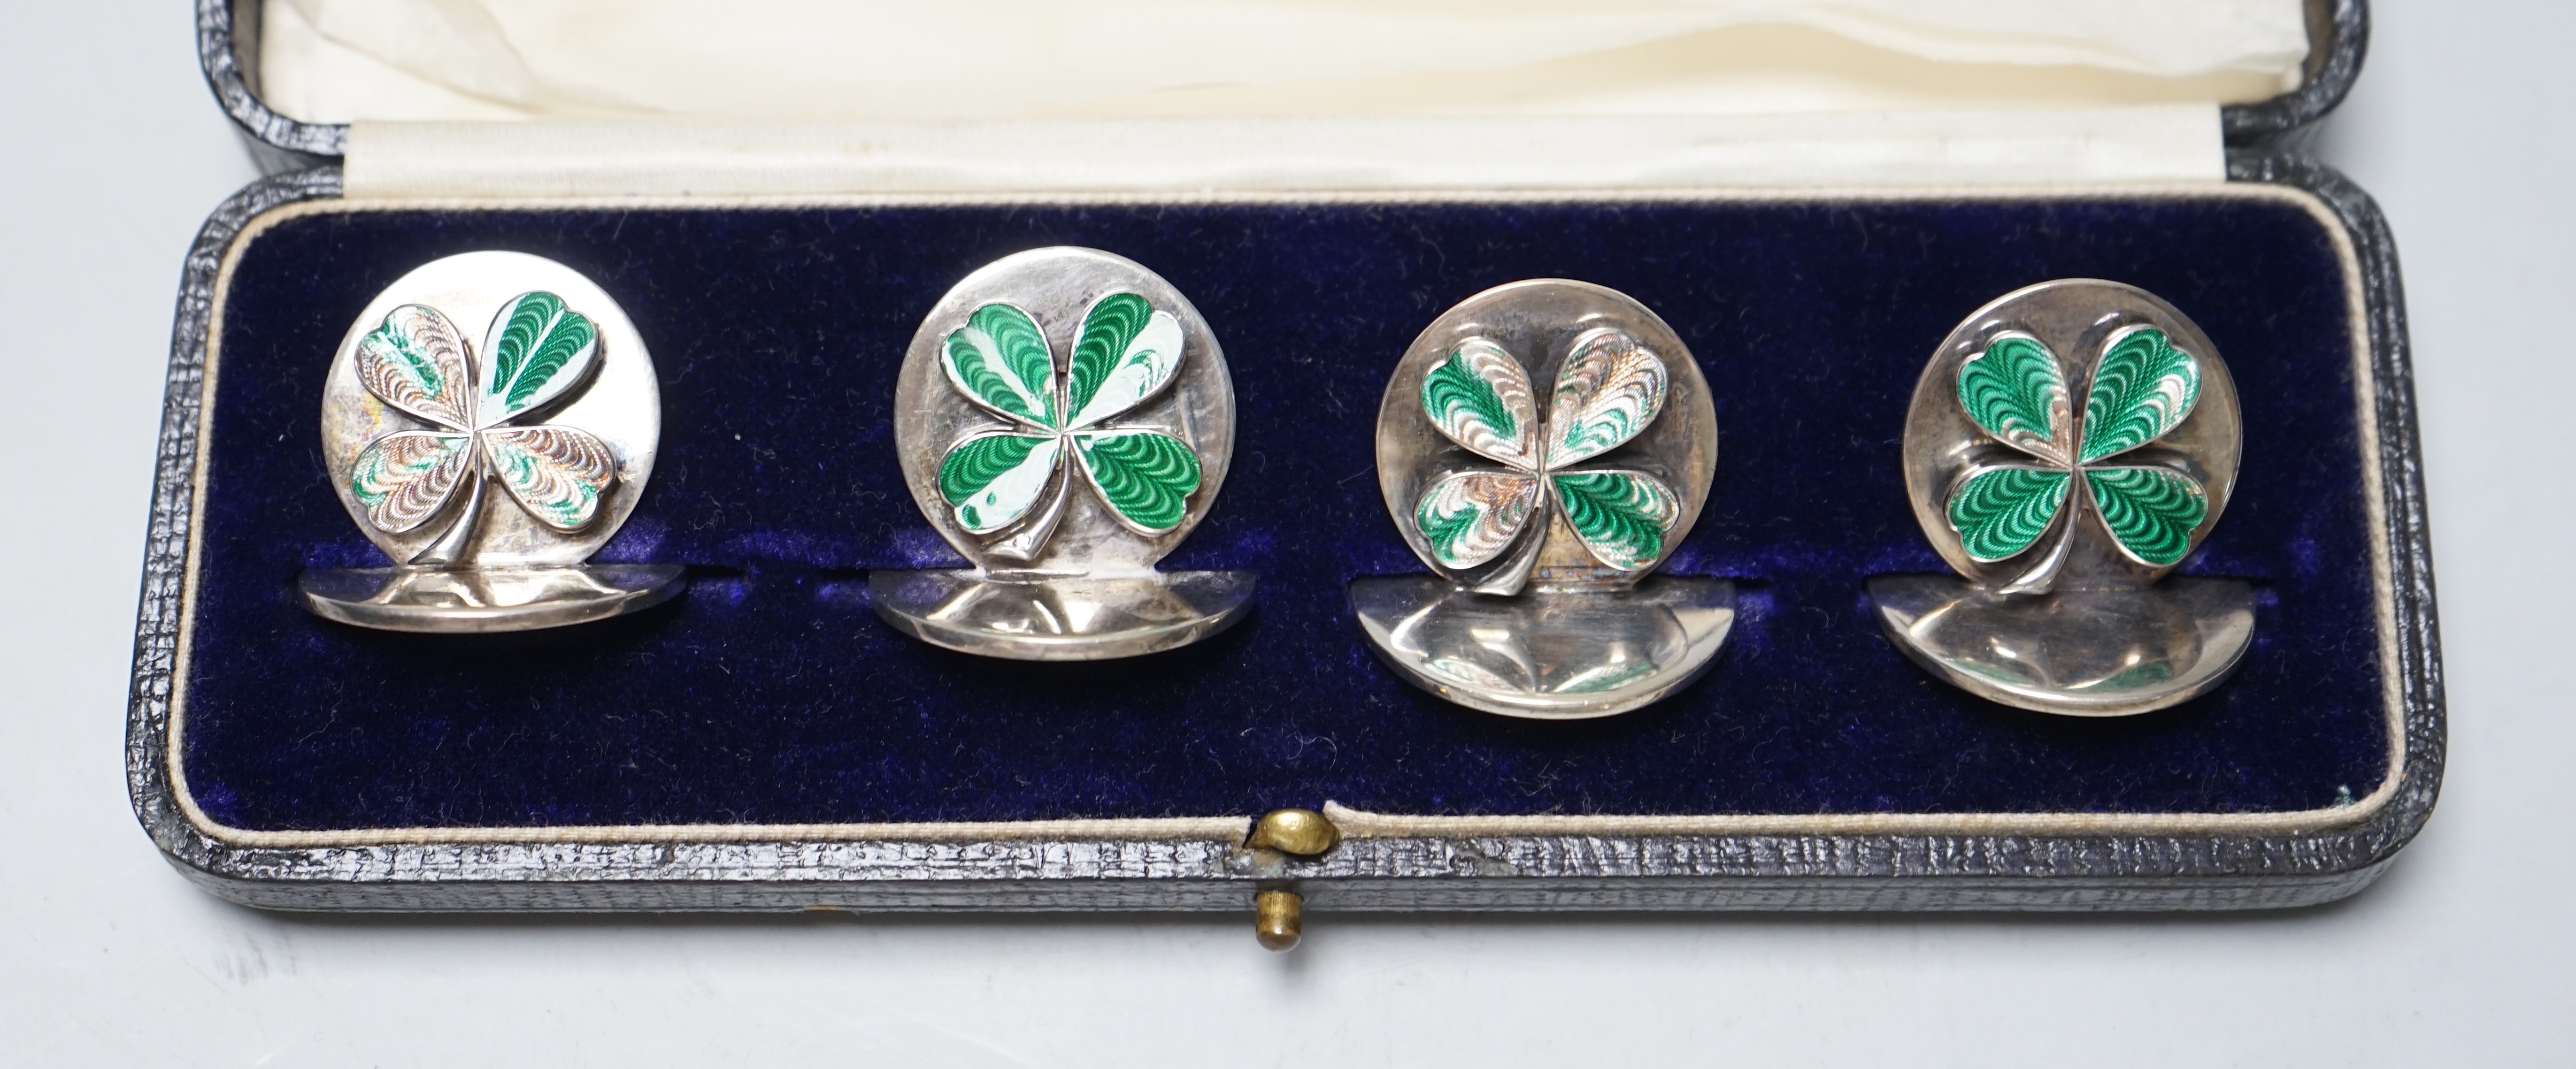 A cased set of four George V enamelled silver menu holders, decorated with four leaf clovers, by